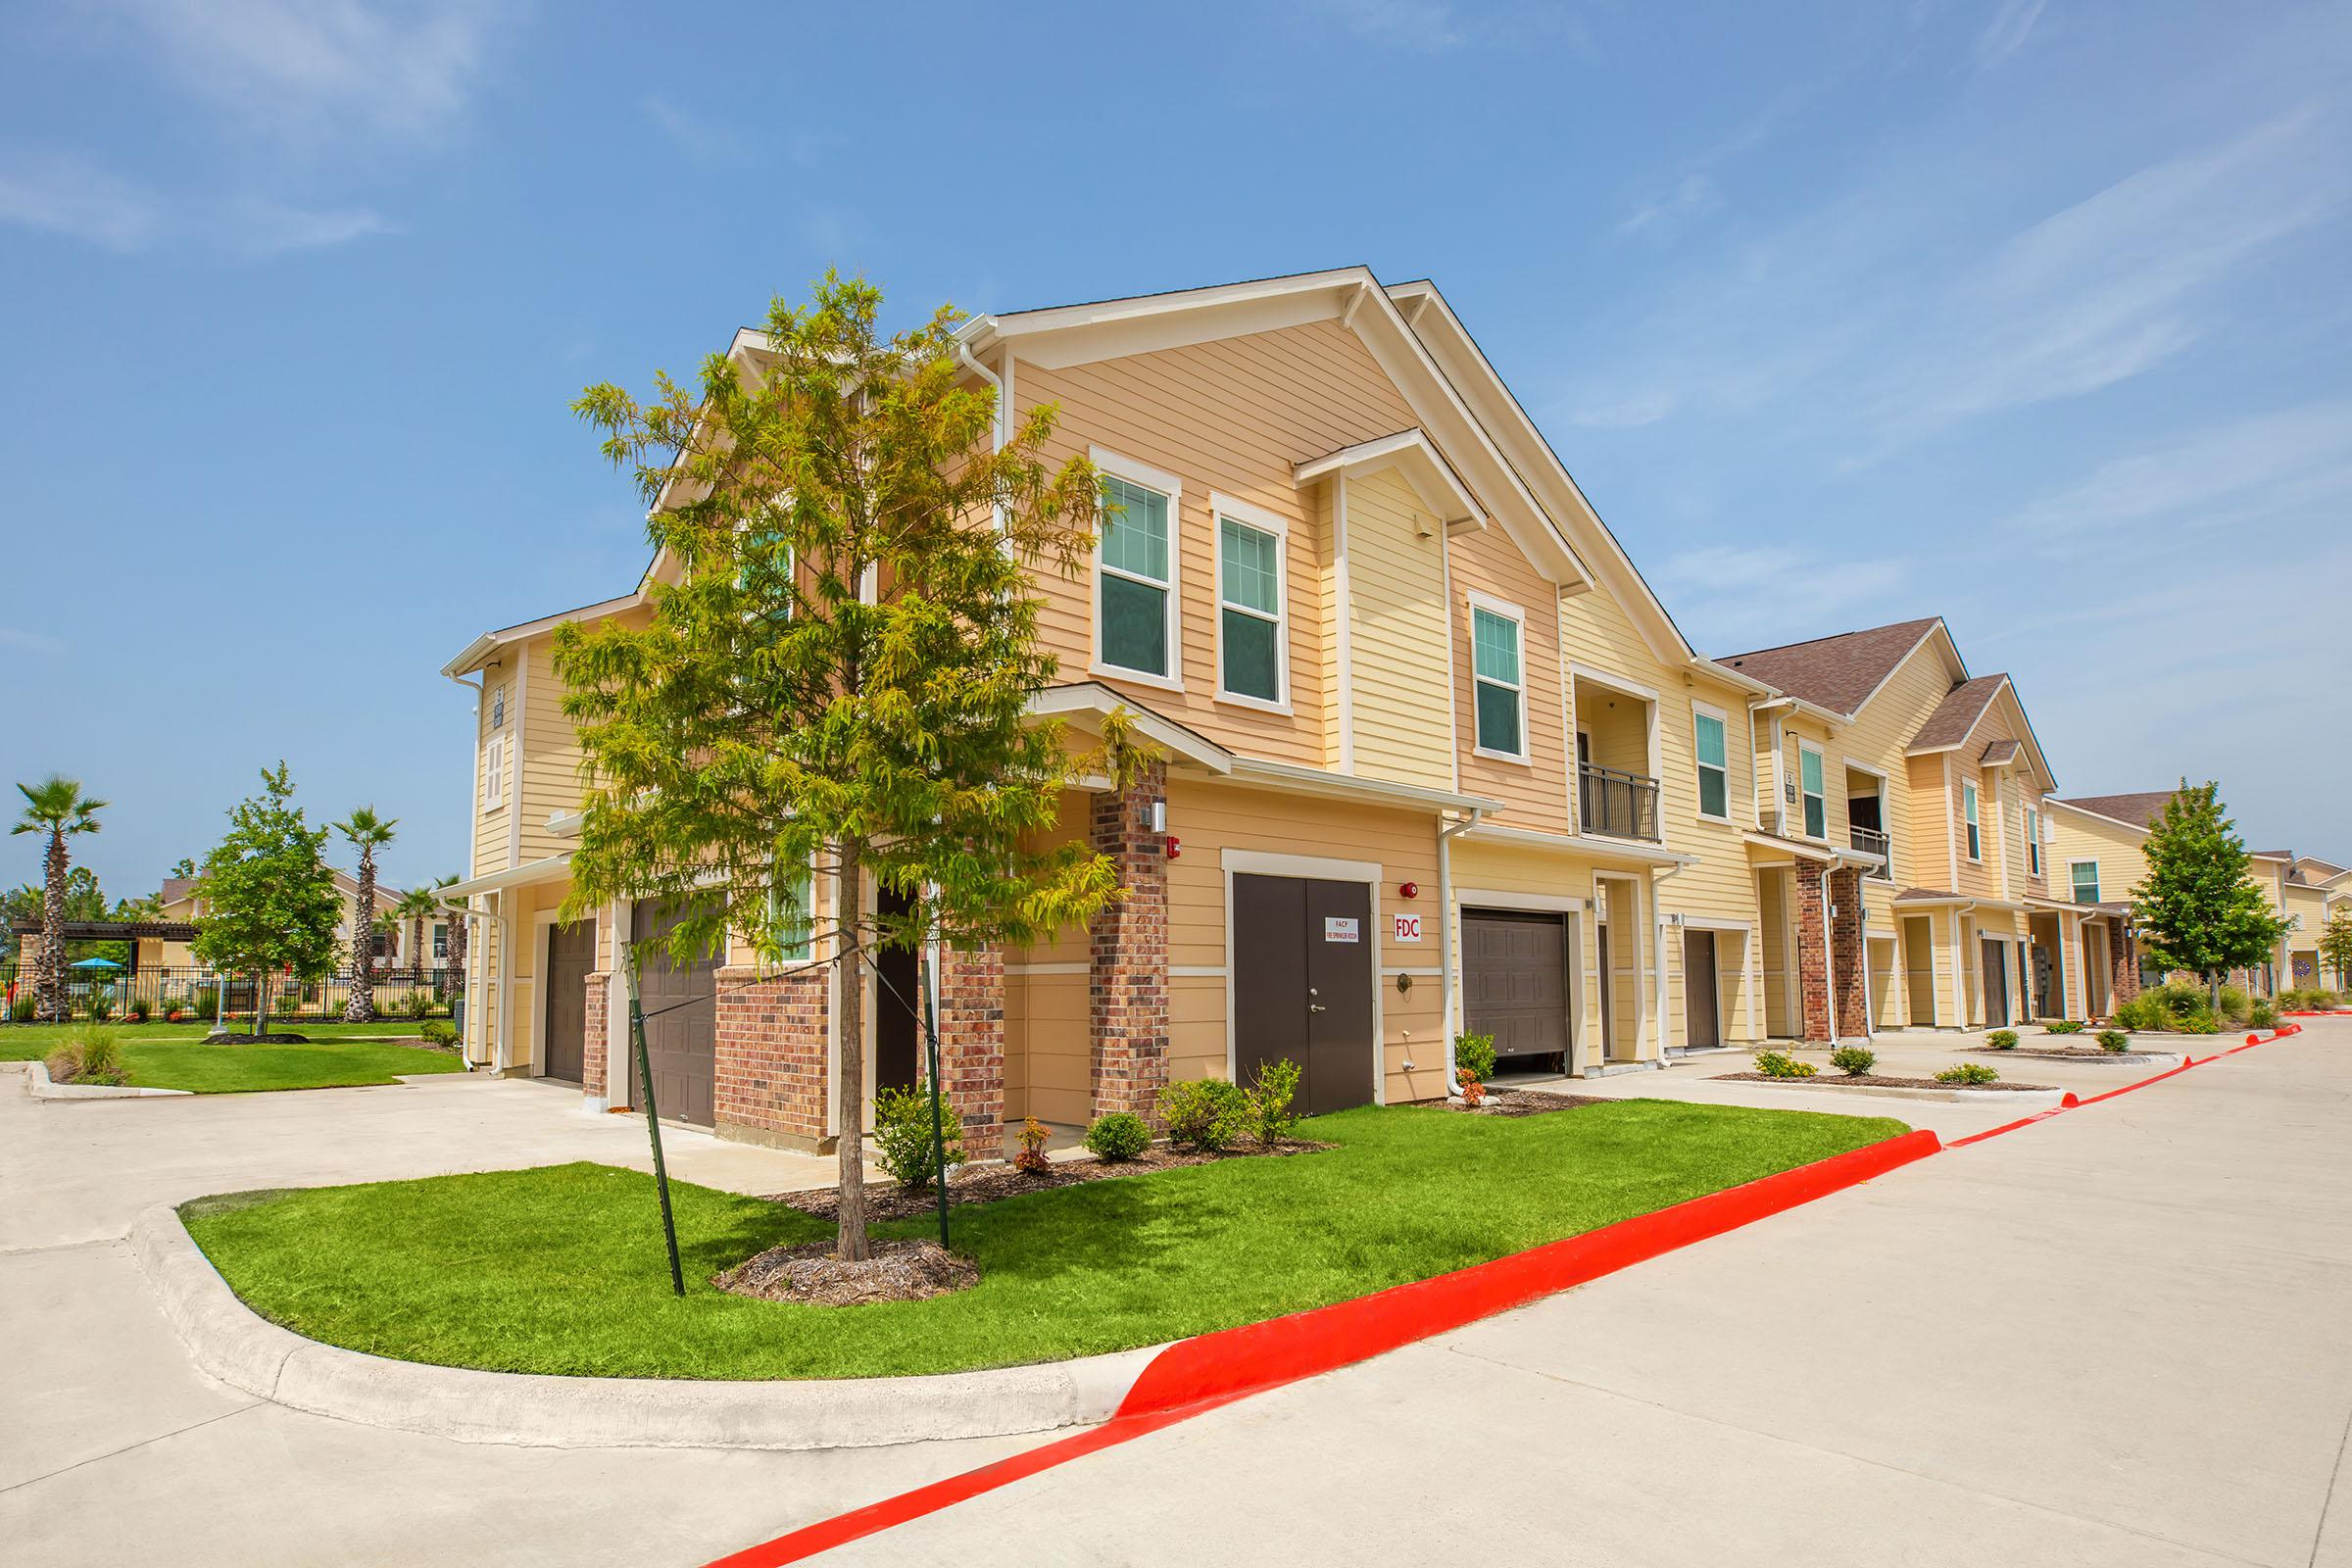 TAKE A TOUR OF YOUR NEW HOME AT THE RESERVE AT PINEWOOD VILLAGE